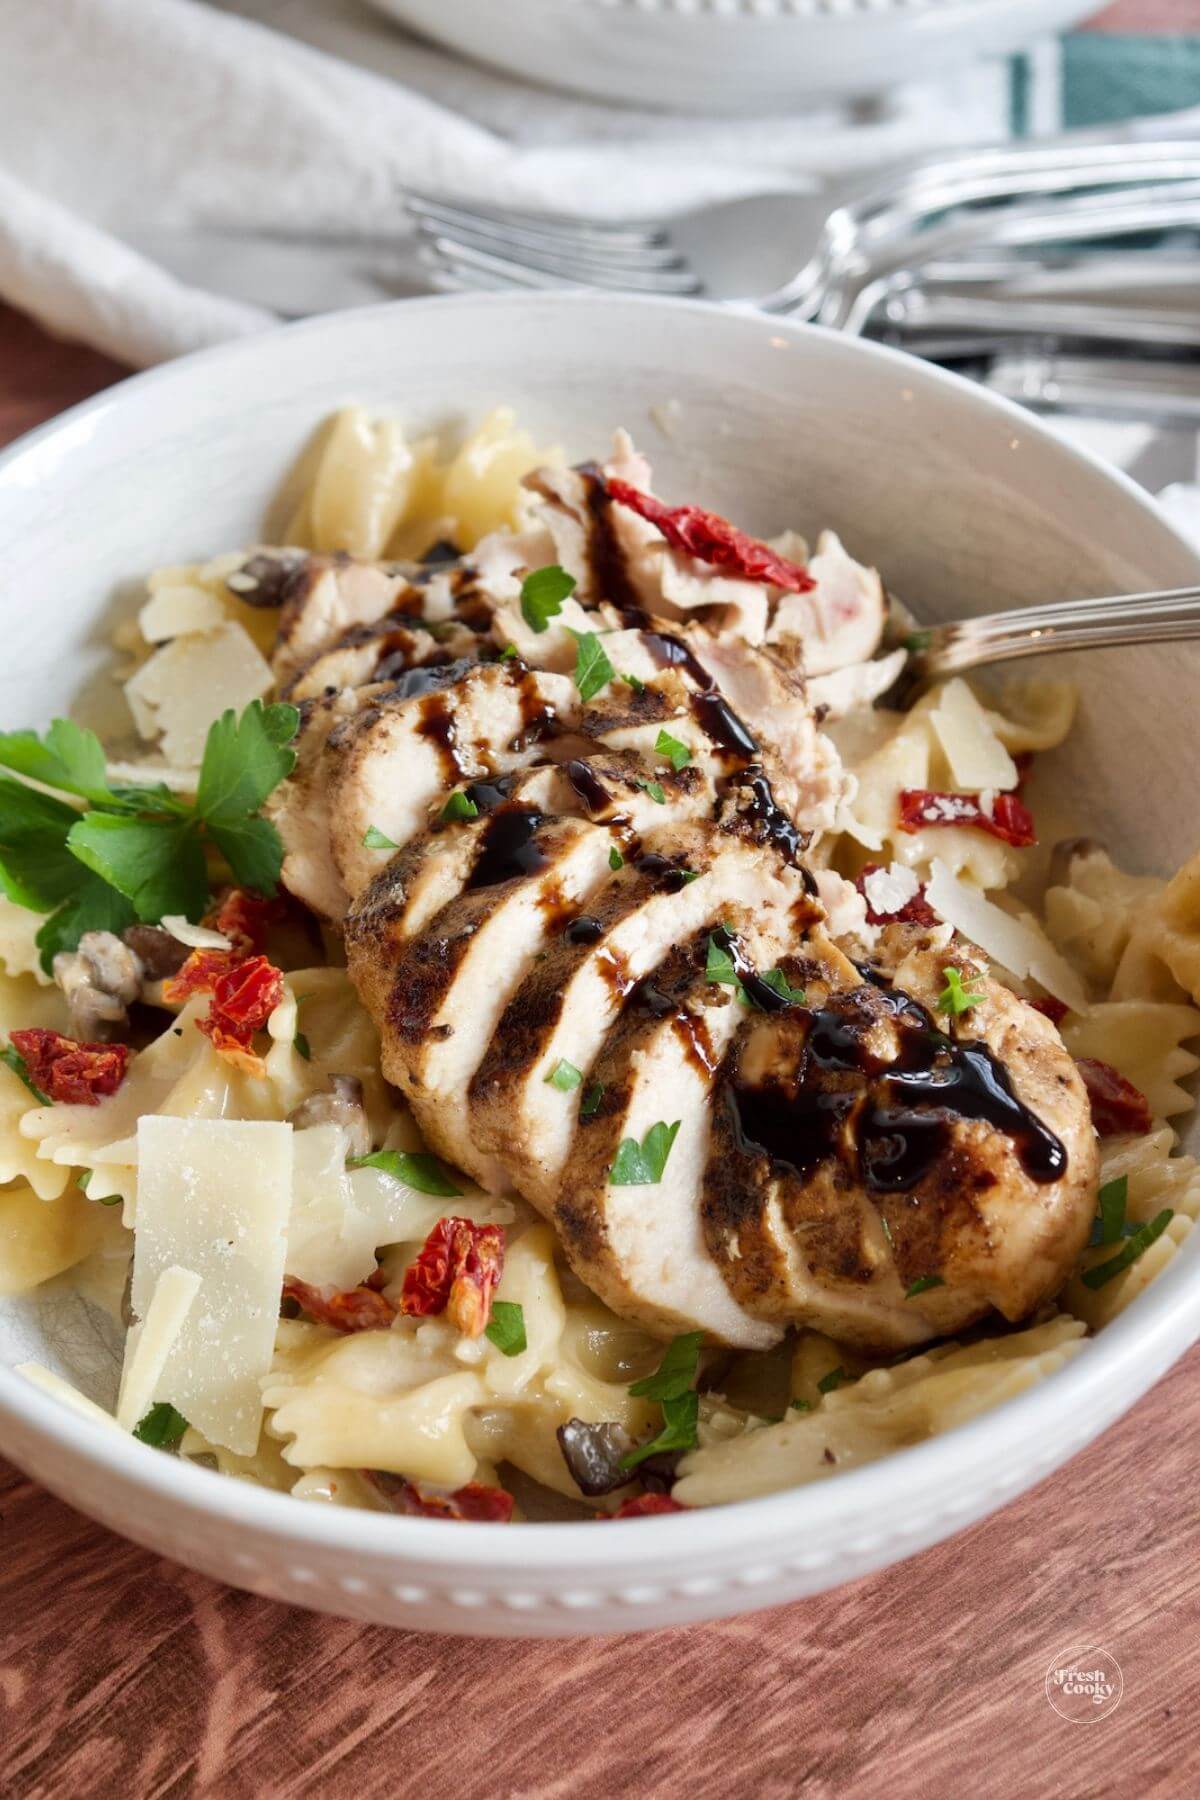 Chicken farfalle in bowl drizzled with balsamic glaze.